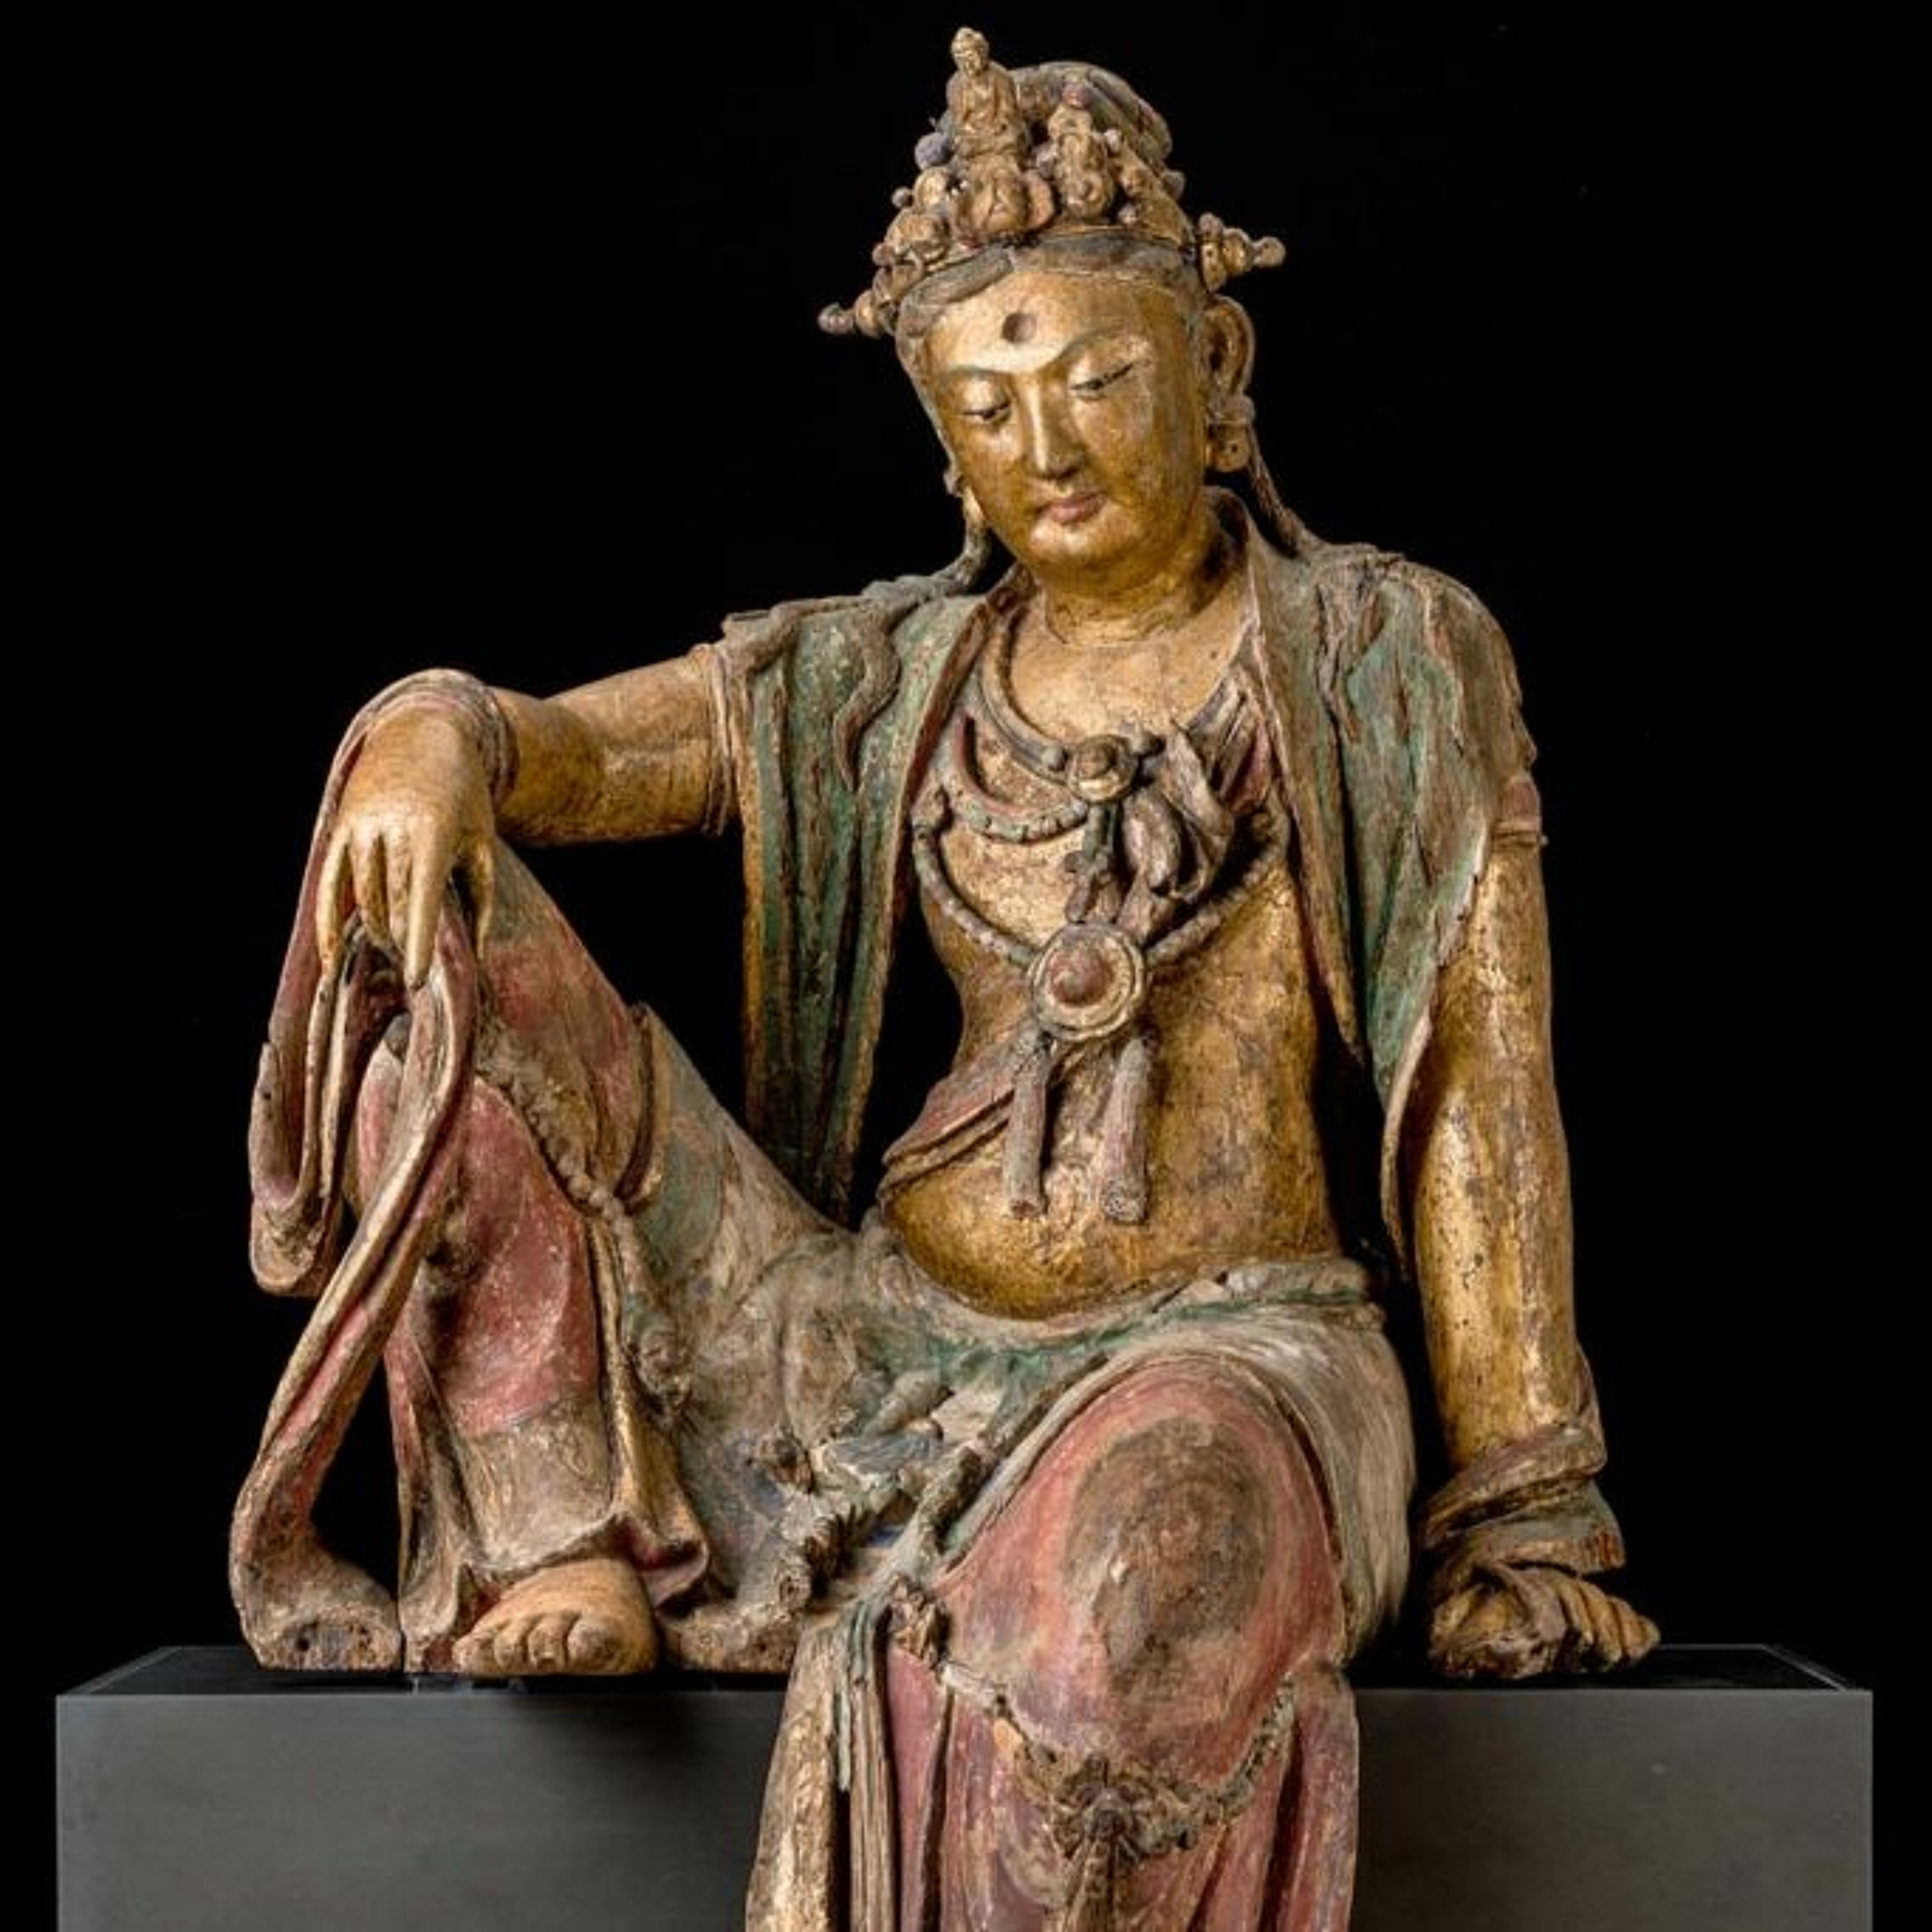 Ep. 19 - Guanyin, Bodhisattva of Compassion (Song Dynasty, 12th c. CE)